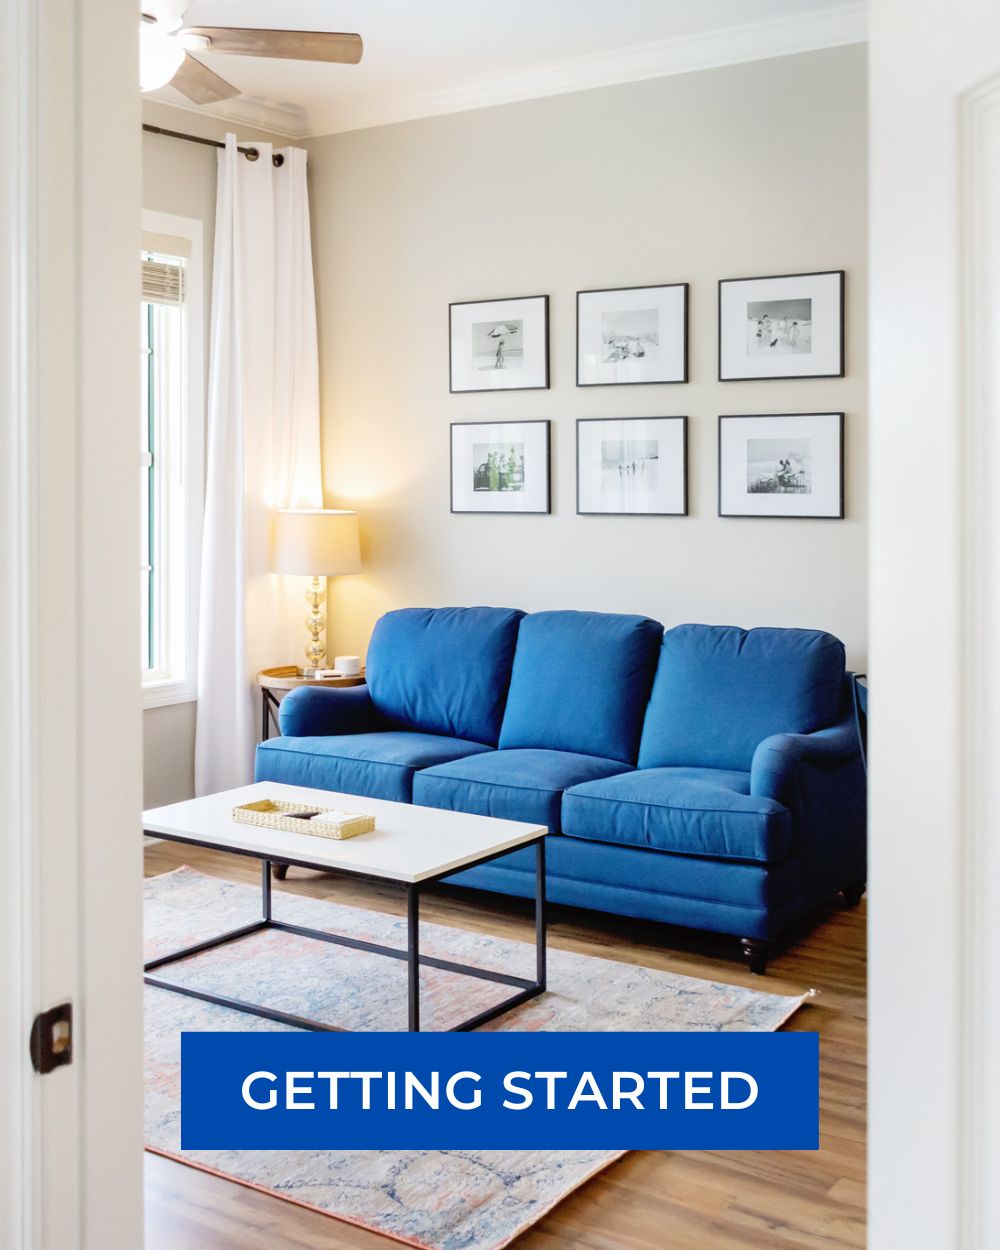 Airbnb Hosting Guide to Getting Started